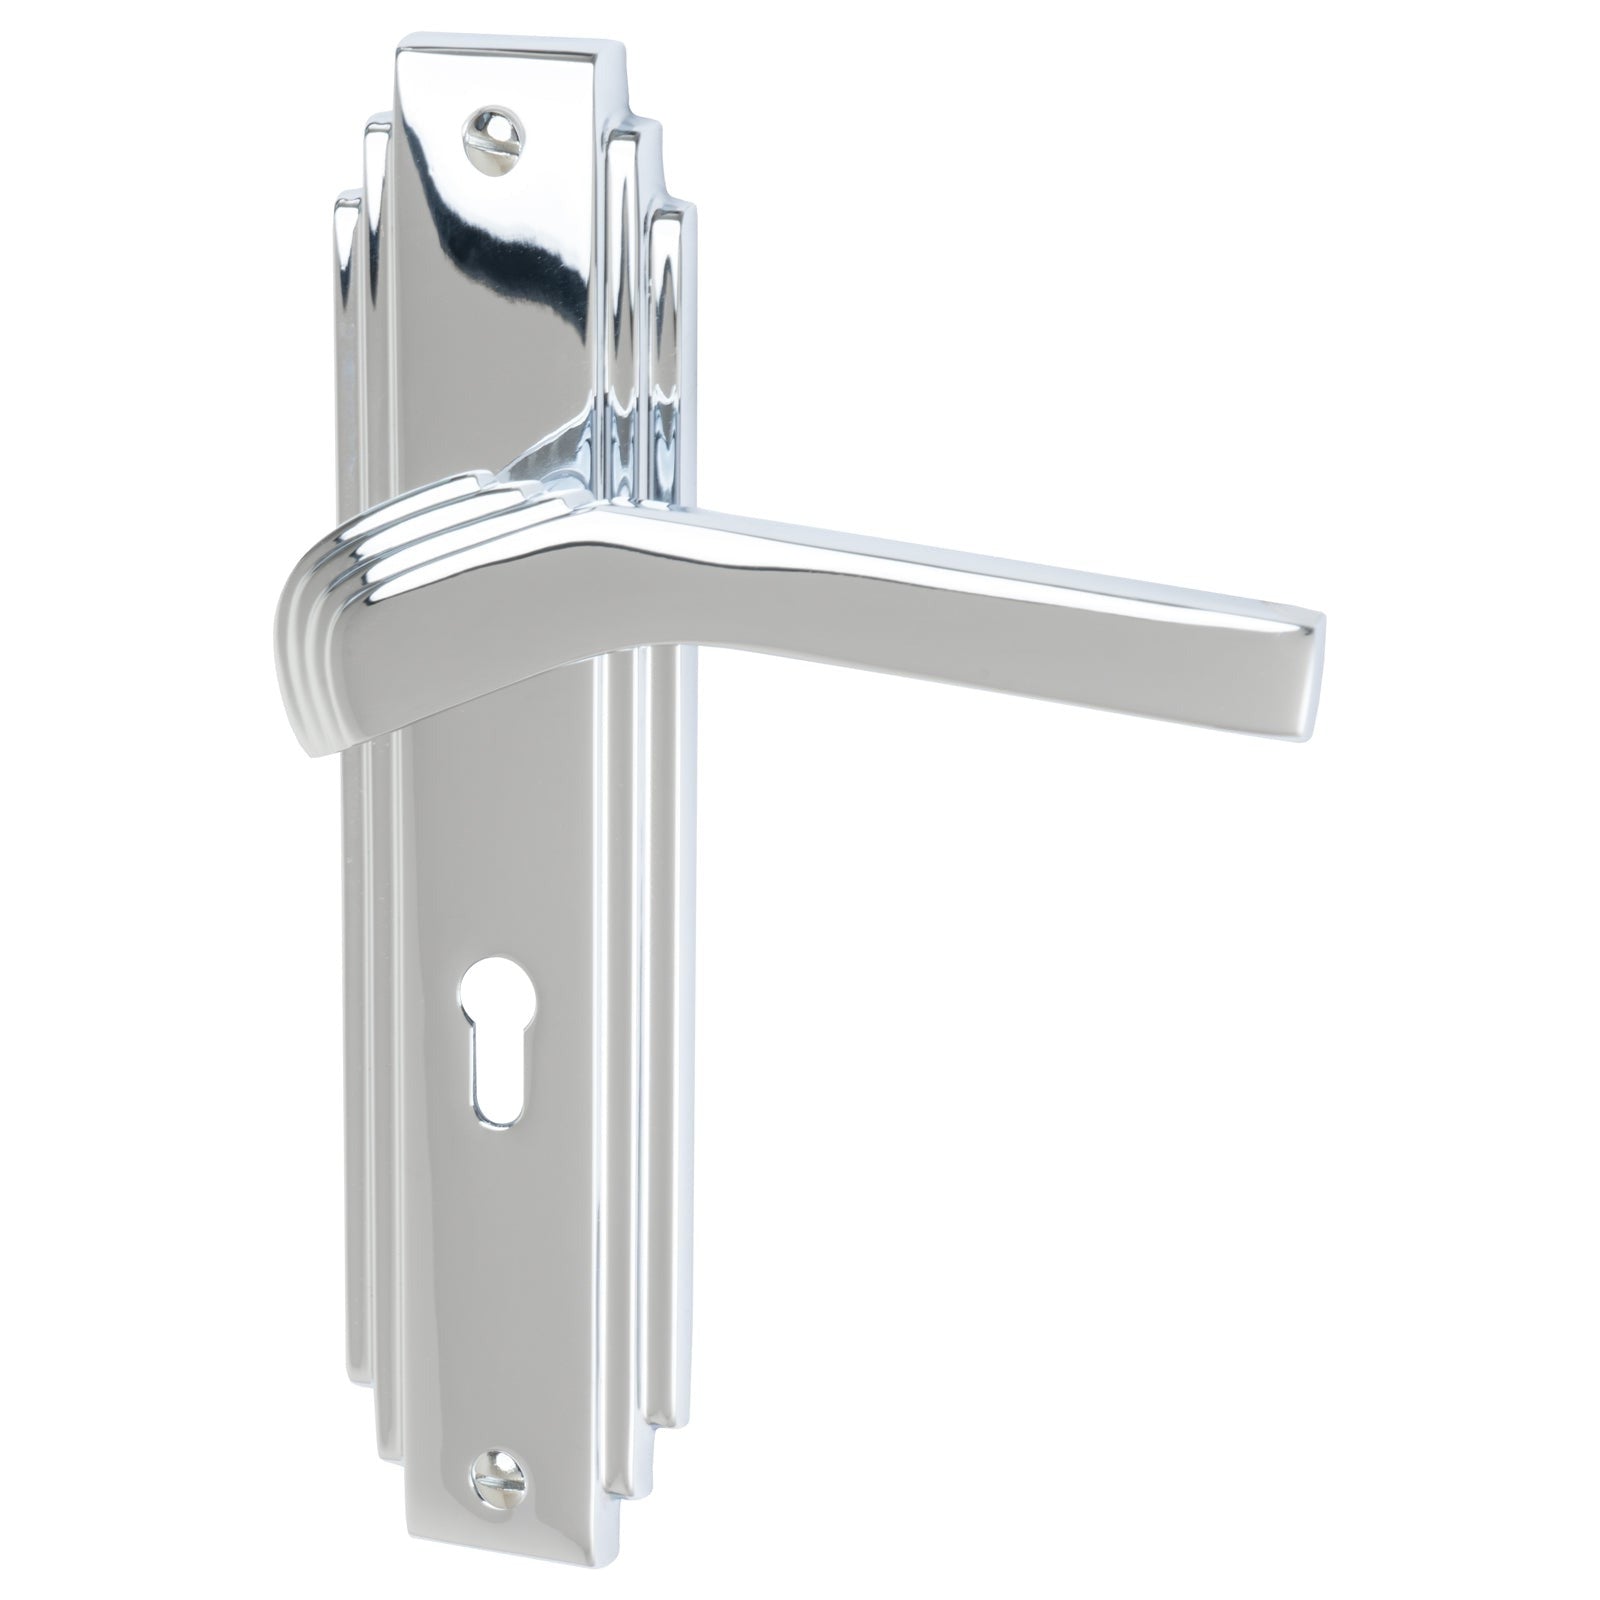 Tiffany Door Handles On Plate Lock Handle in Polished Chrome 